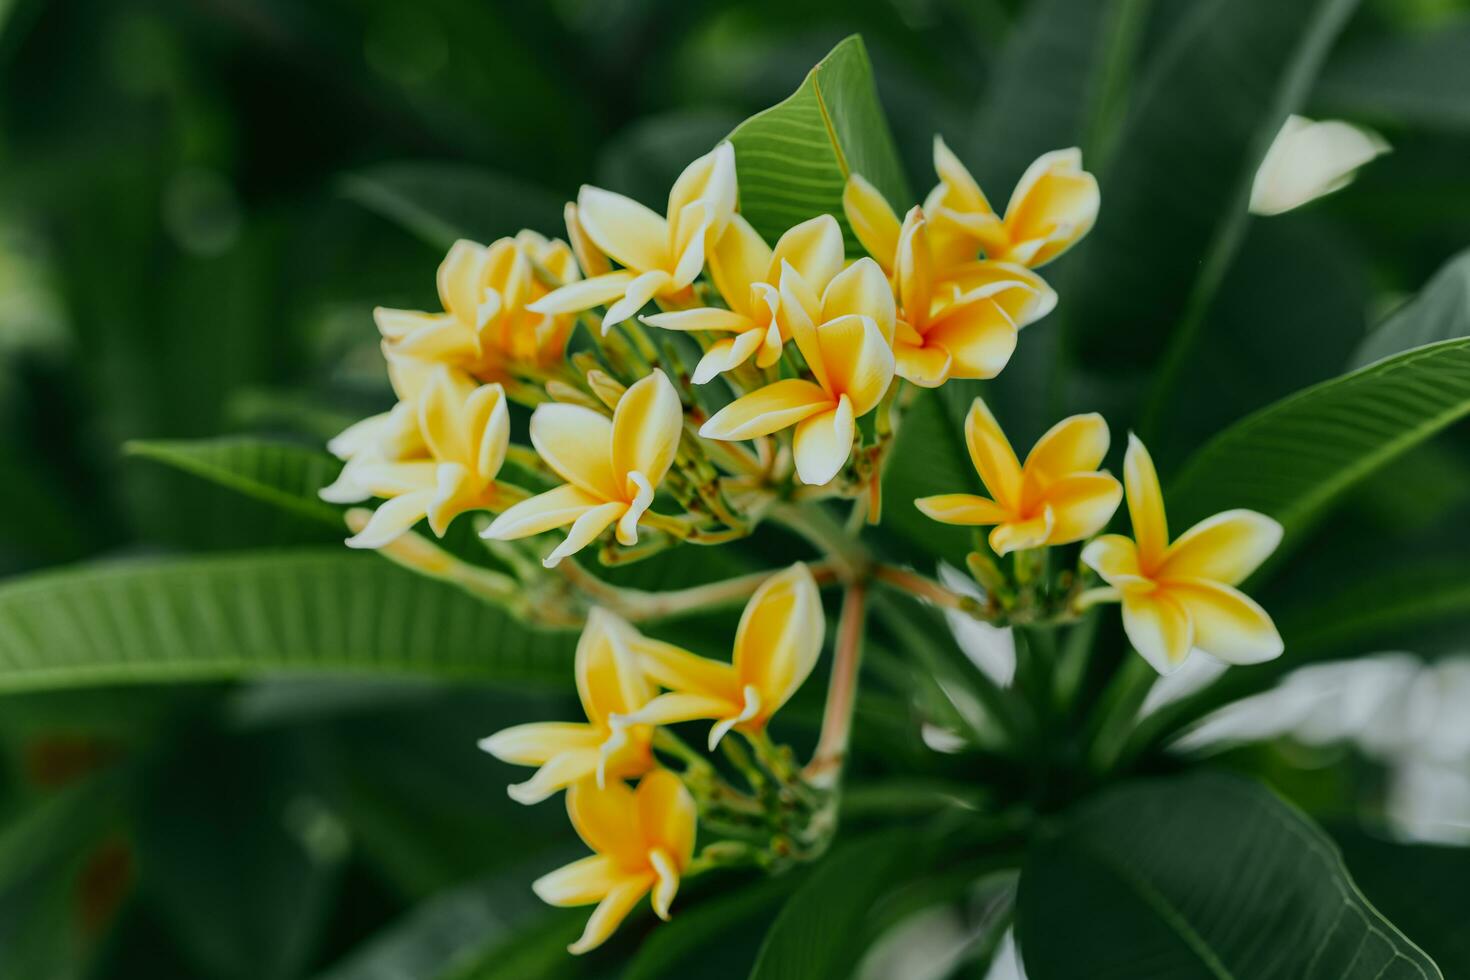 Yellow frangipani flowers or Plumeria close up on green leaf background. For spa and therapy flower, Frangipani, Plumeria, Temple Tree, Graveyard Tree. photo